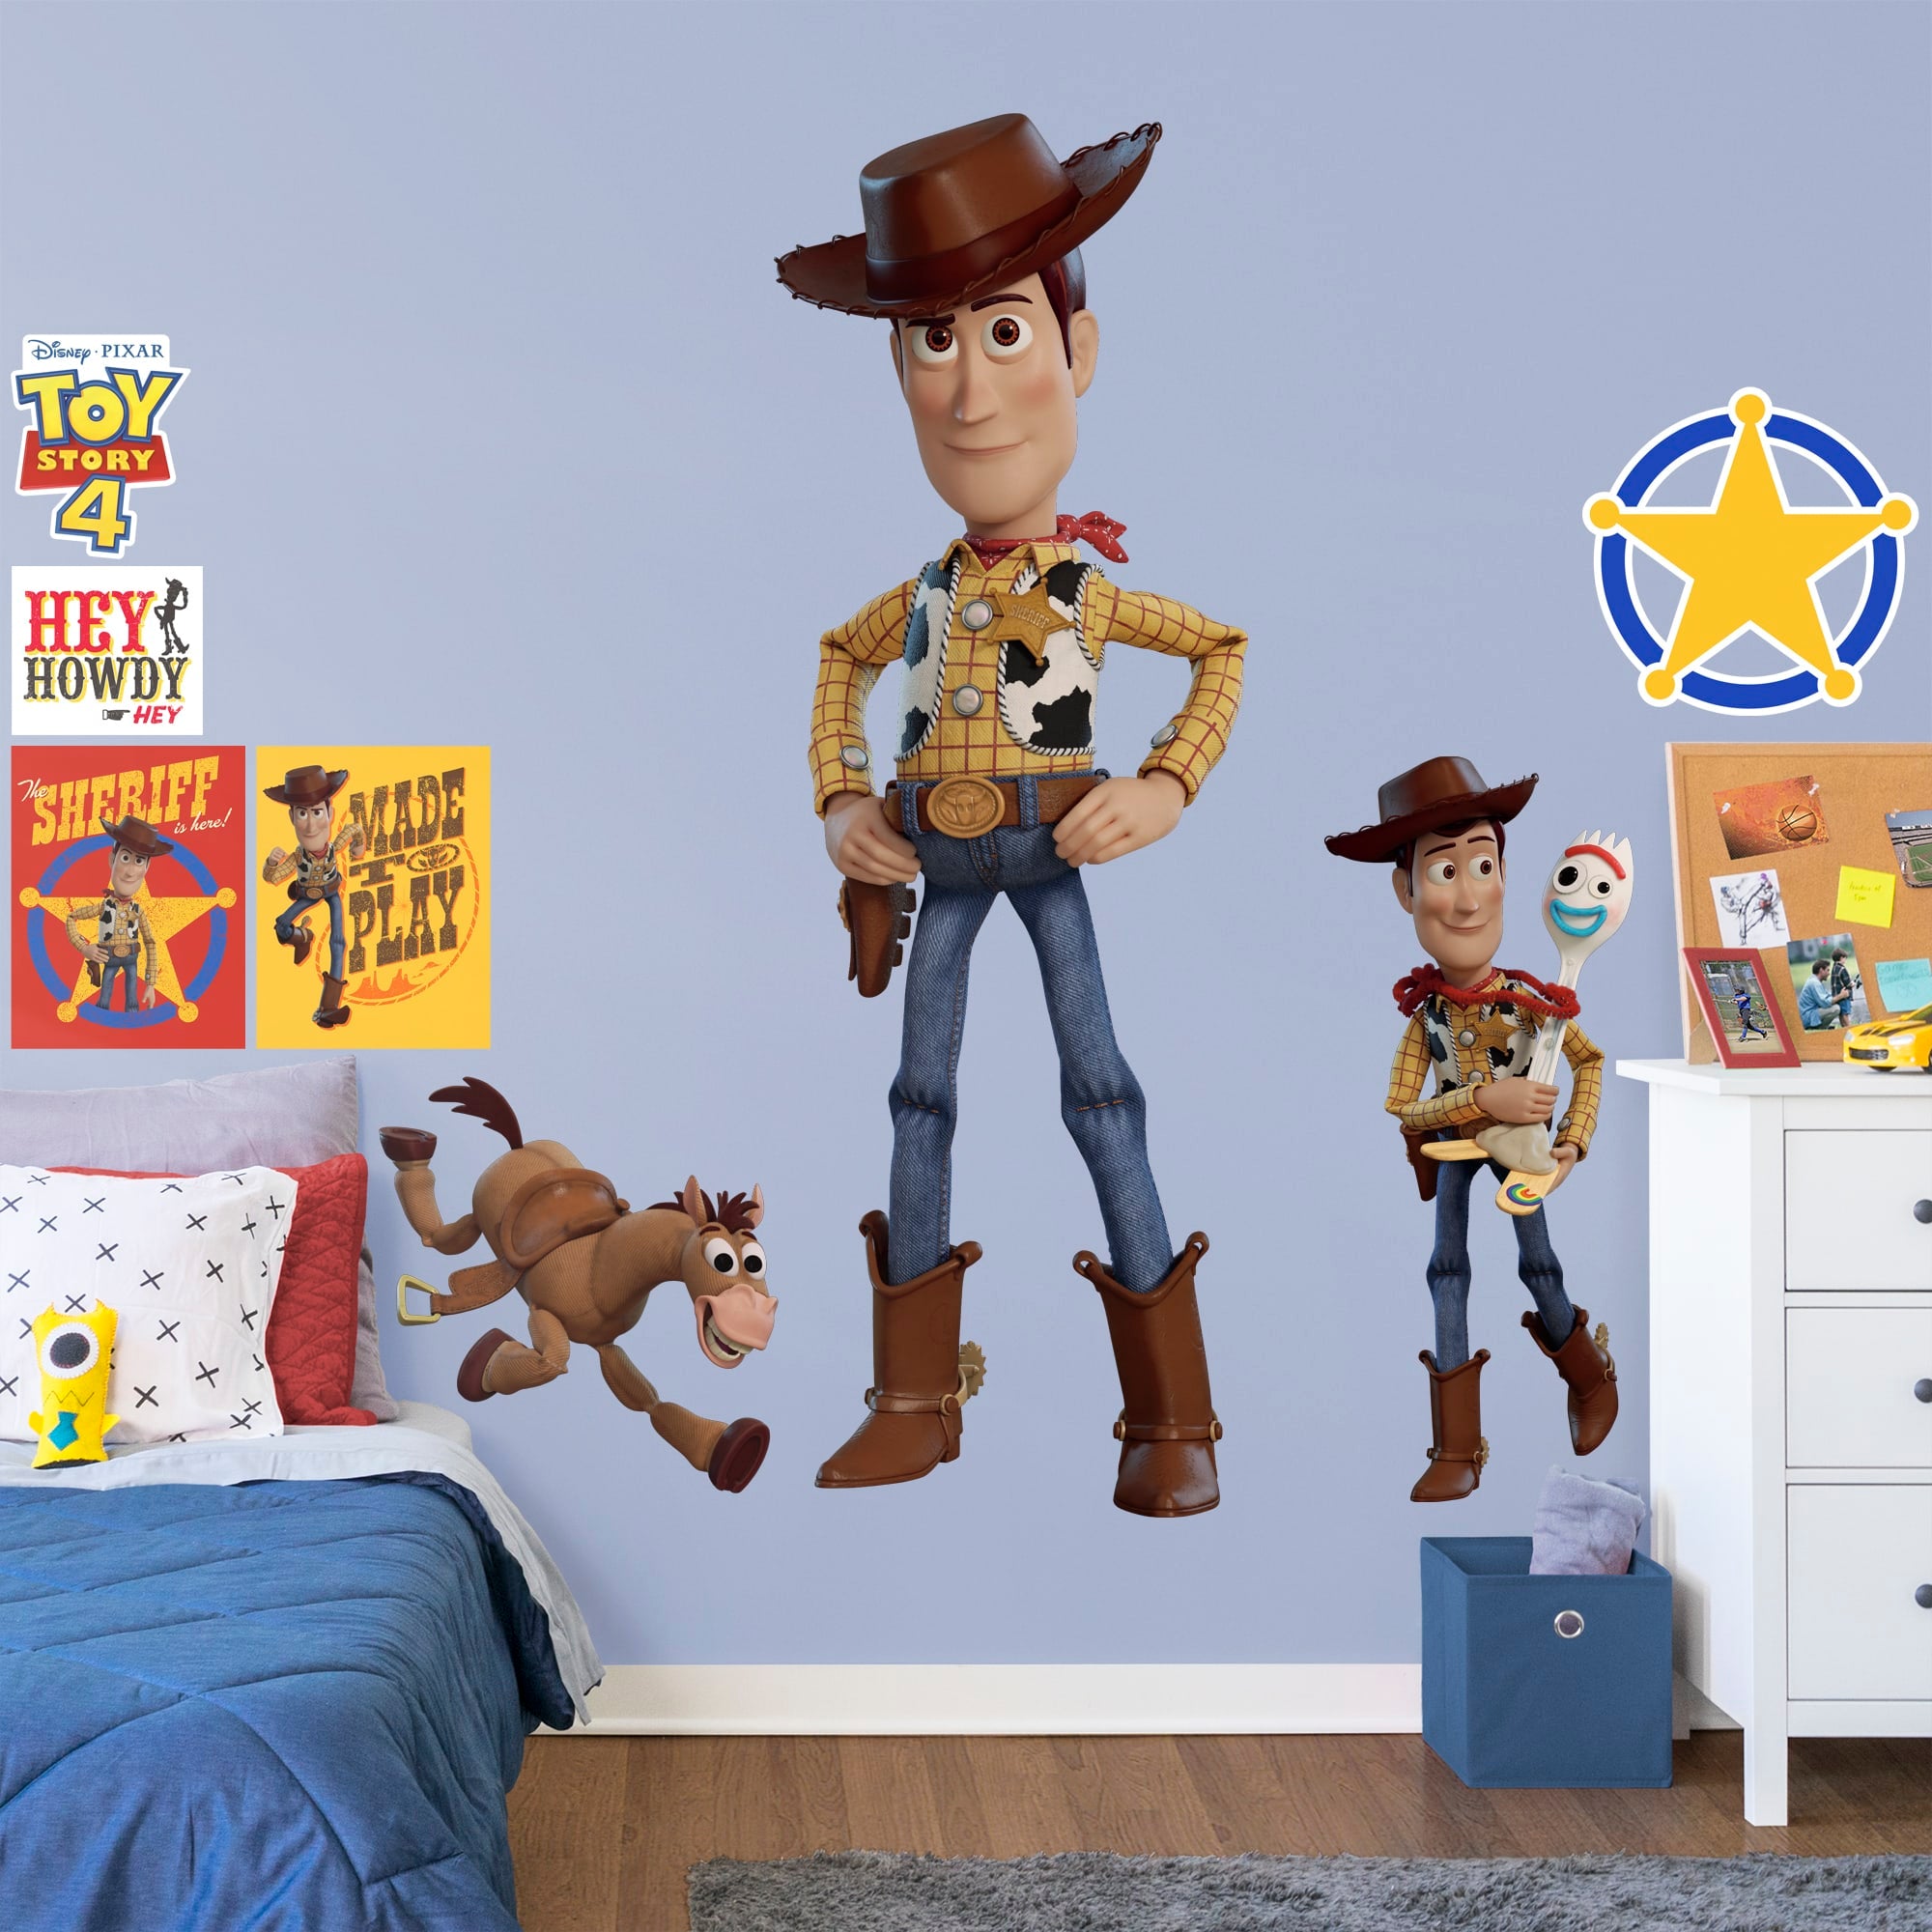 Toy Story 4: Woody - Officially Licensed Disney/PIXAR Removable Wall Graphic Huge Character + 9 Decals (26"W x 78"H) by Fathead